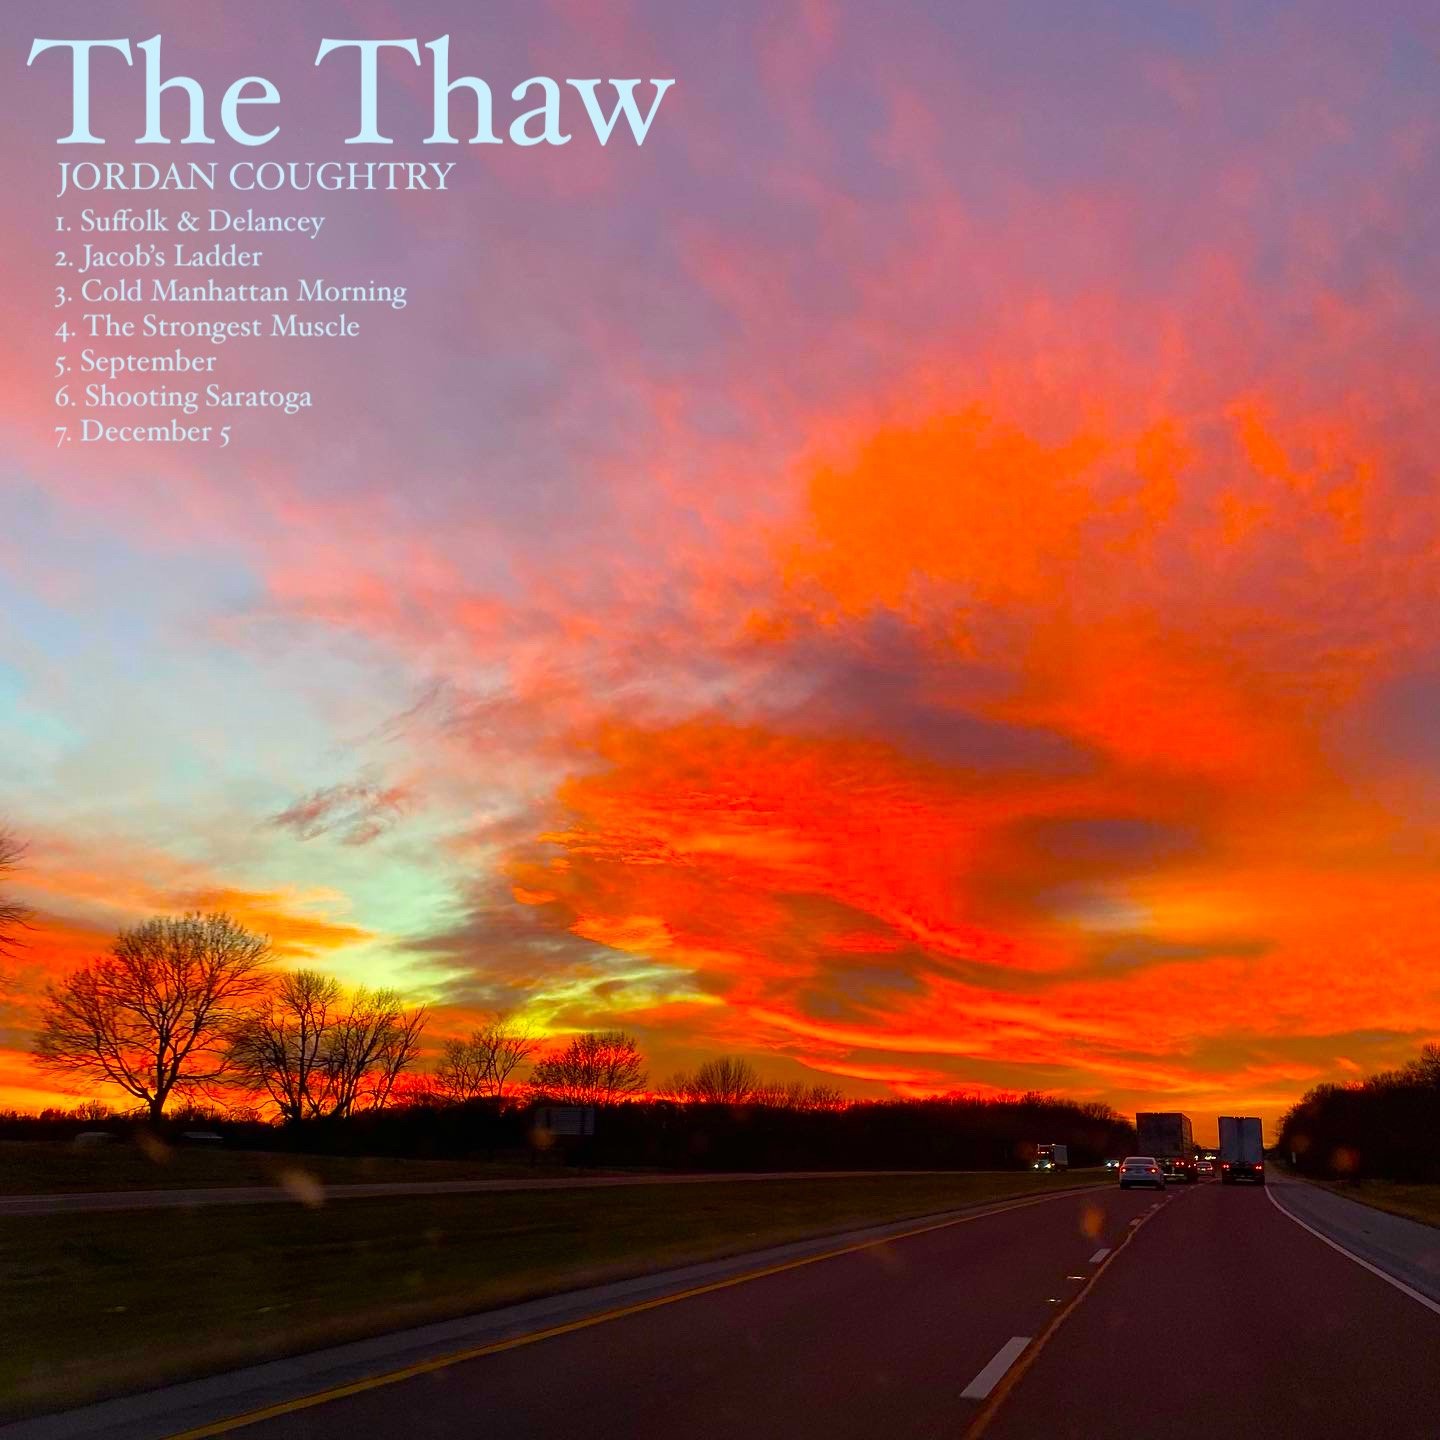 THE THAW